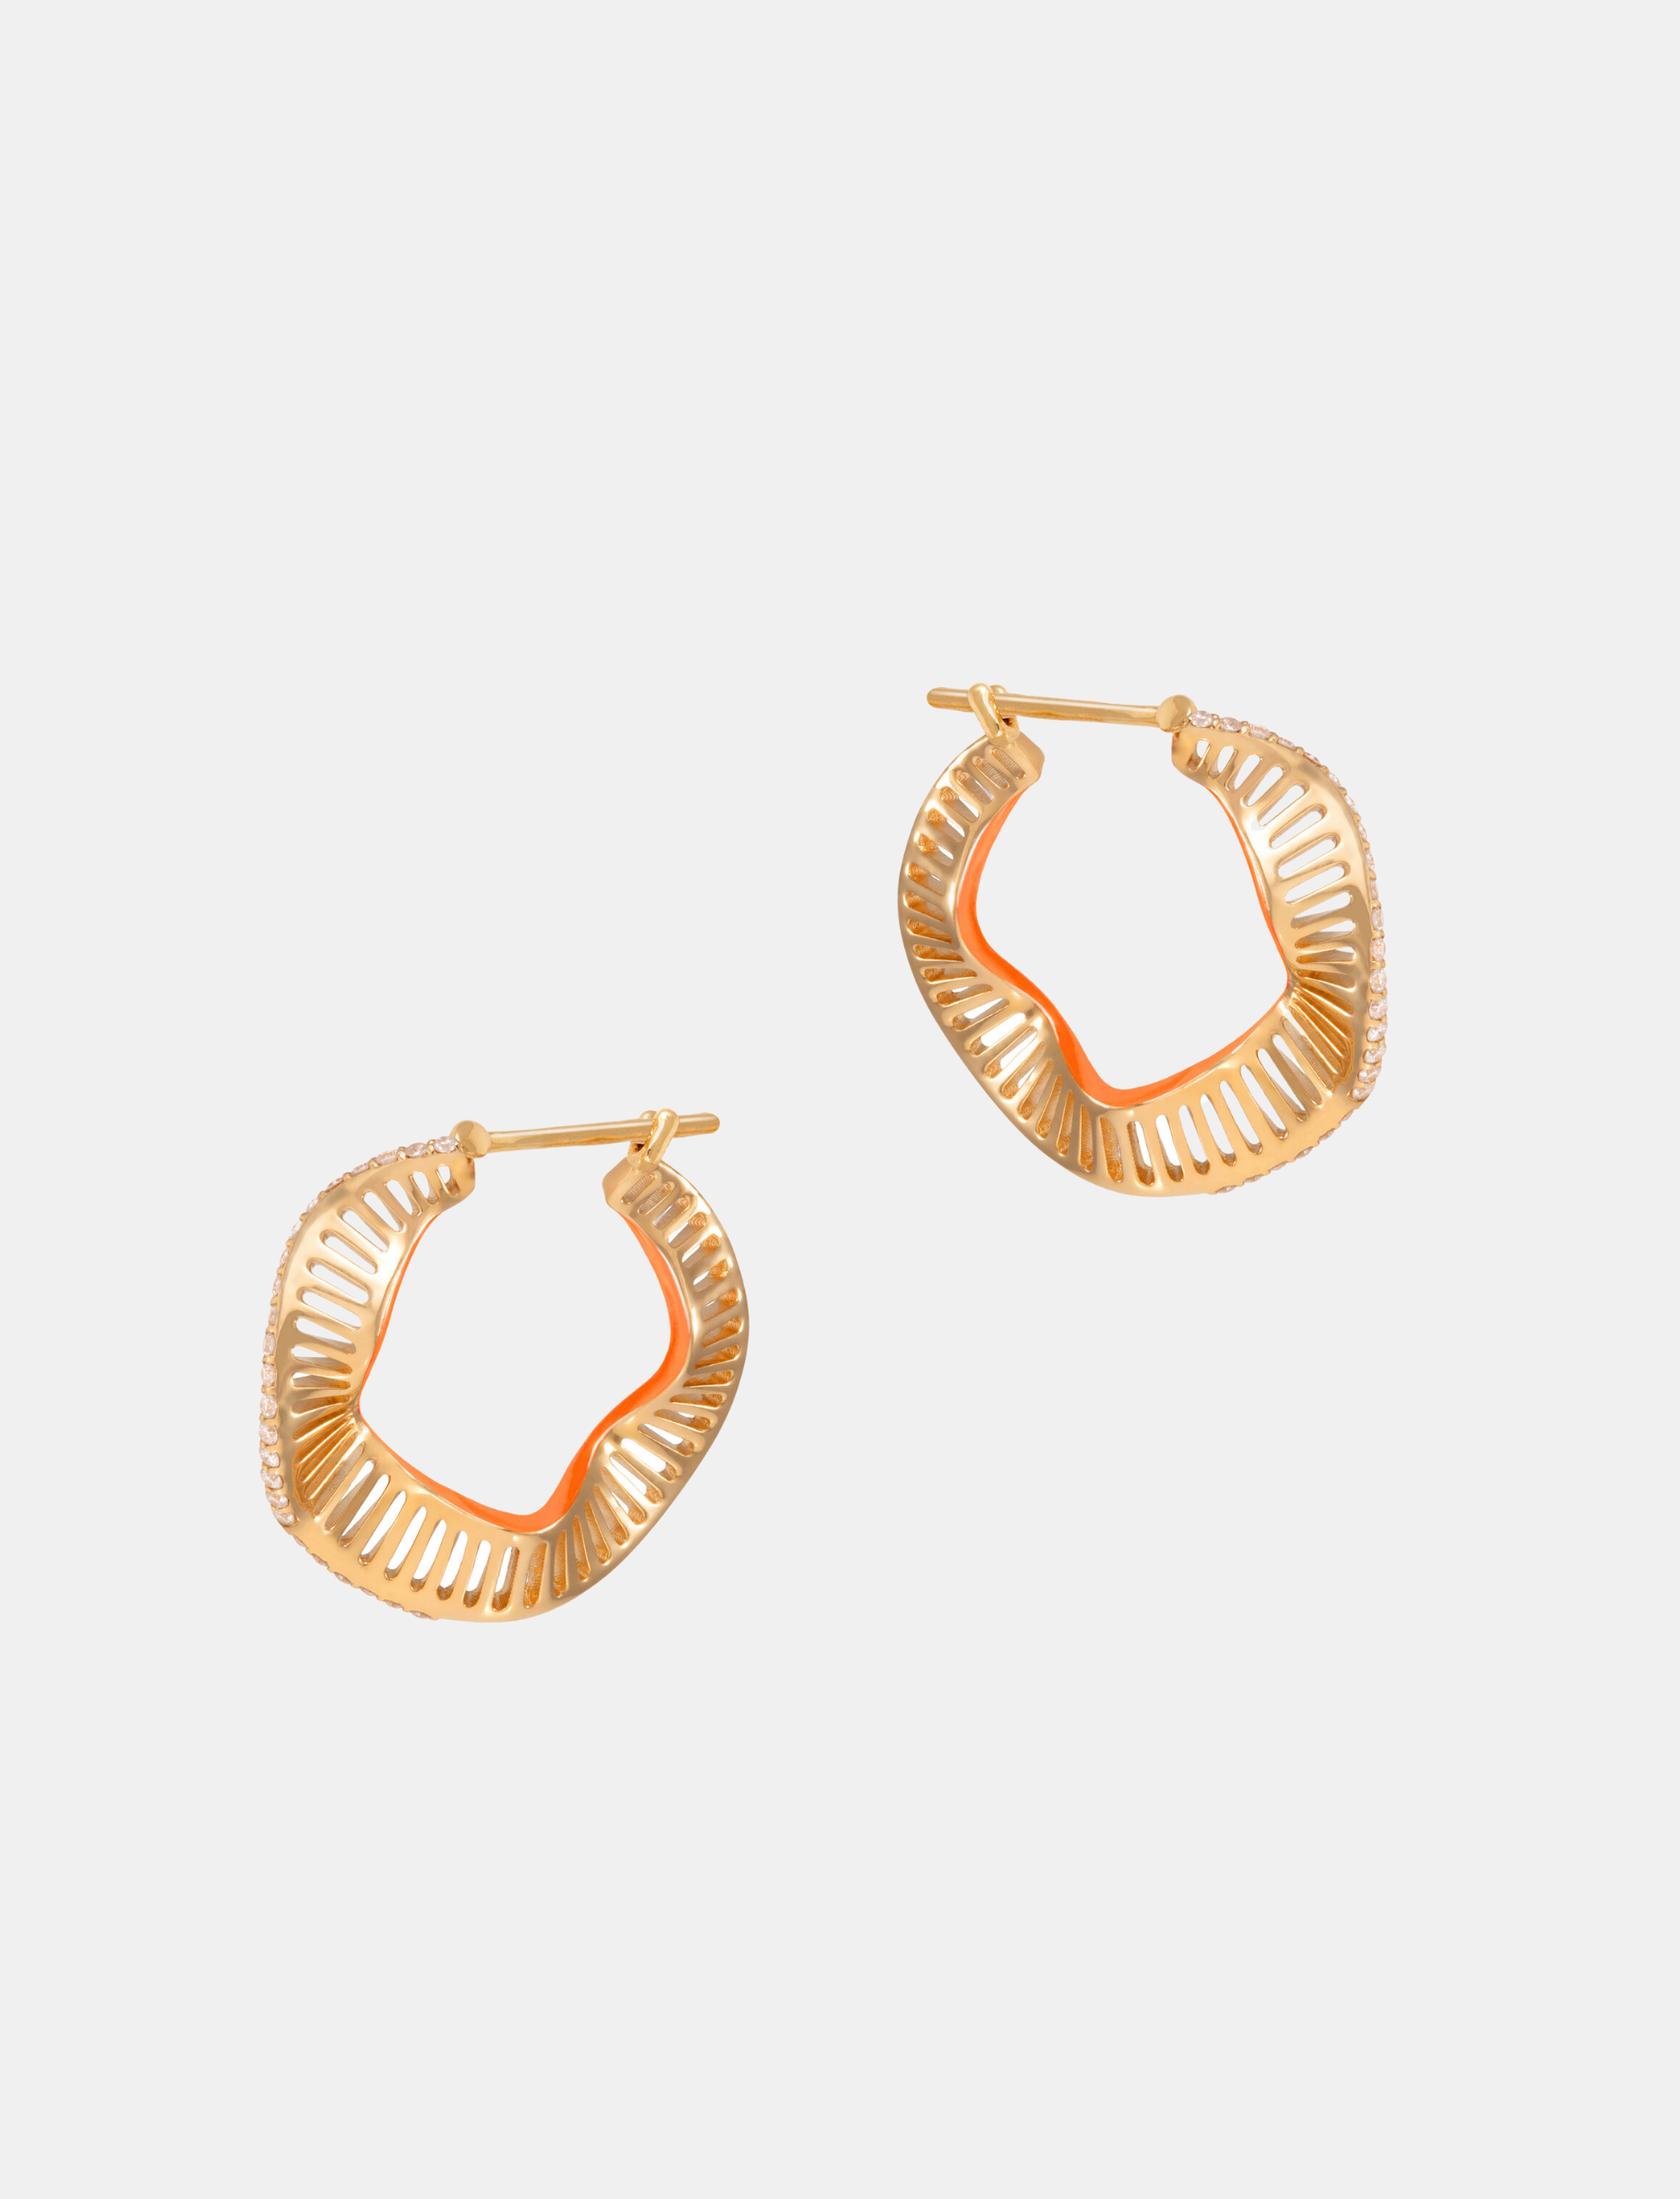 Waves Hoops - Size 2